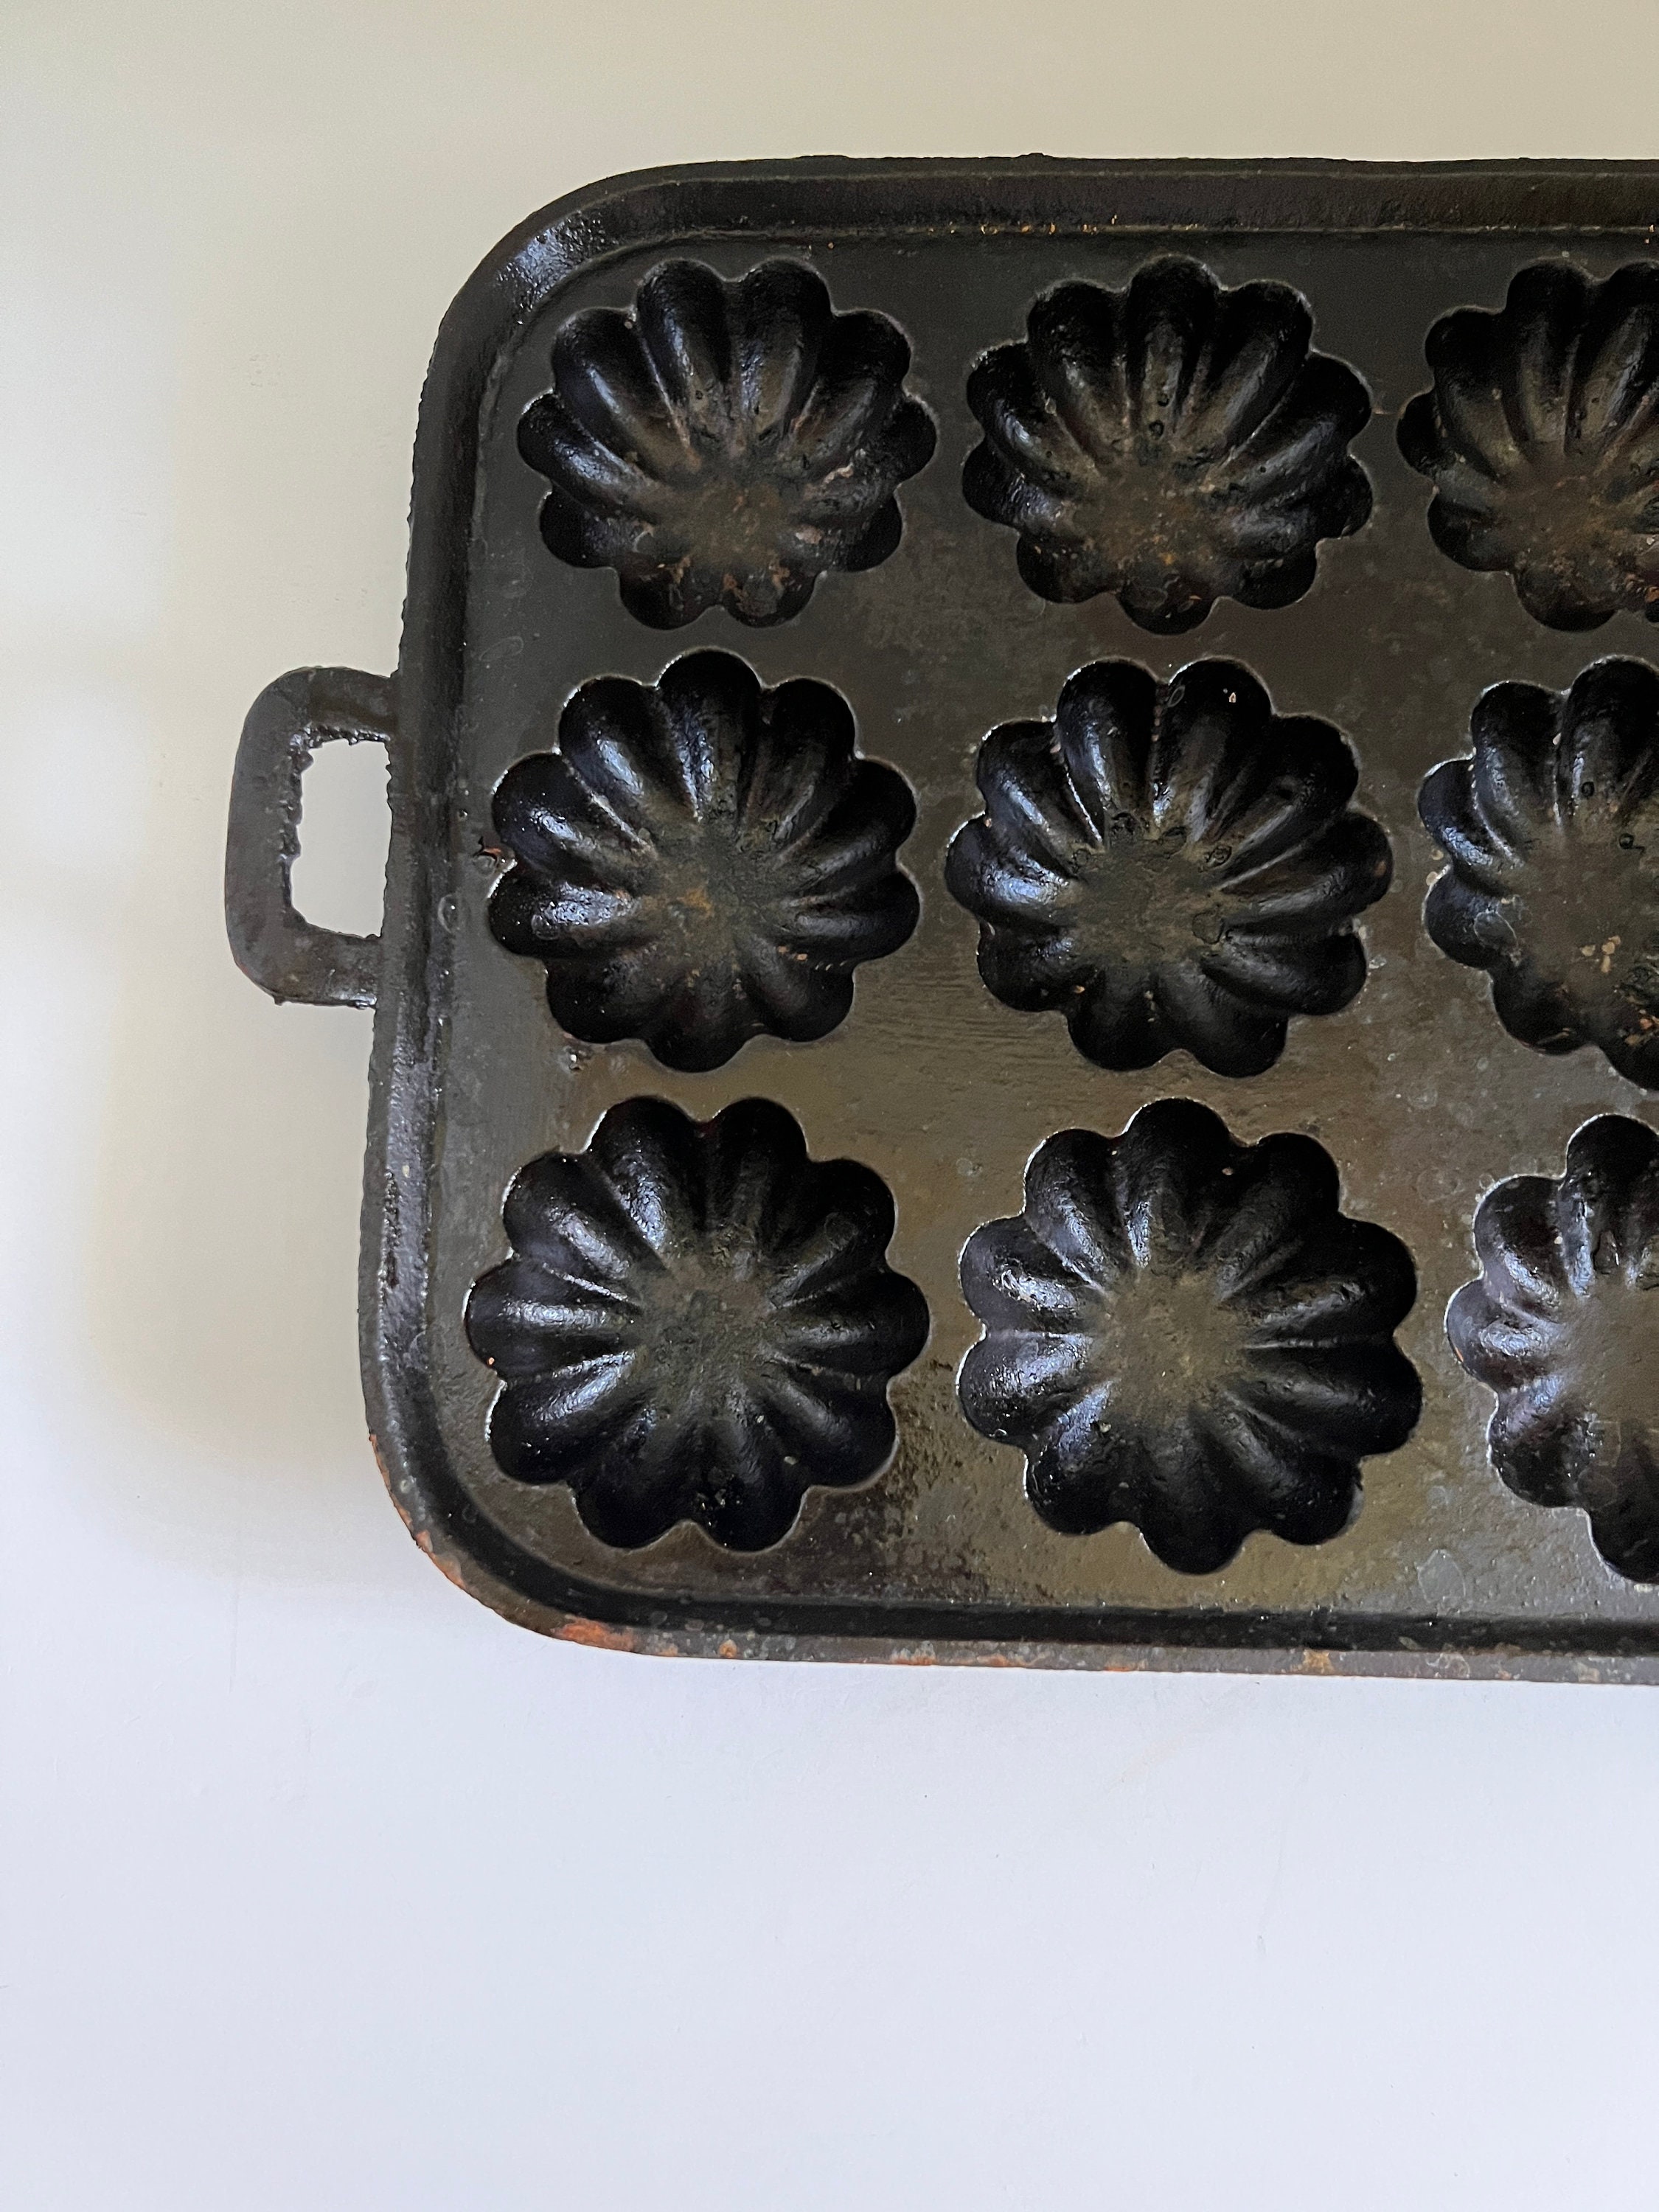 Cast Iron, Turks Head, Gem Pan, 12 Muffins, Collectable Cast Iron